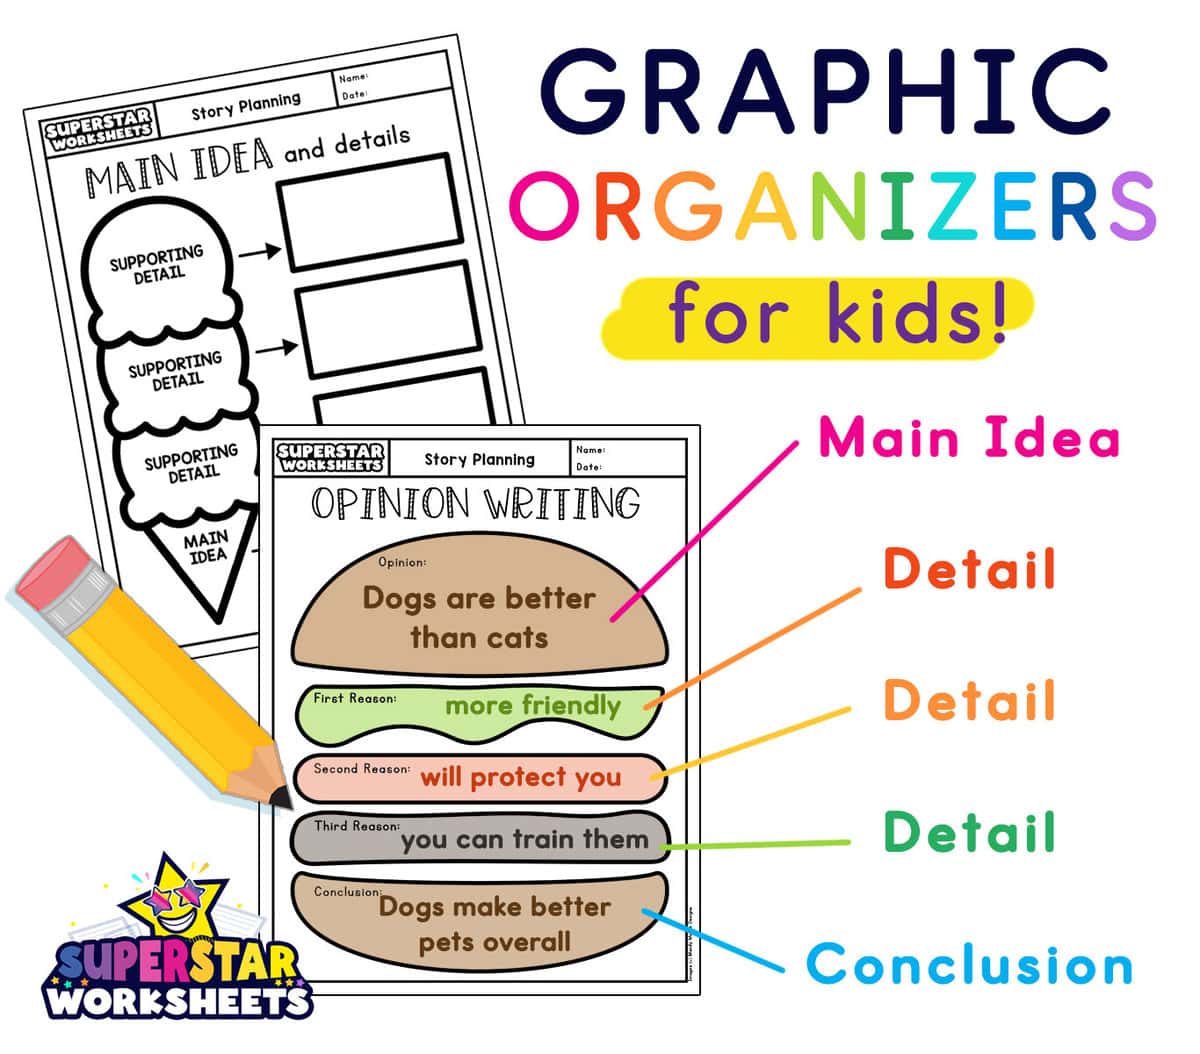 Vocabulary 4-Square Graphic Organizers - The Homeschool Daily